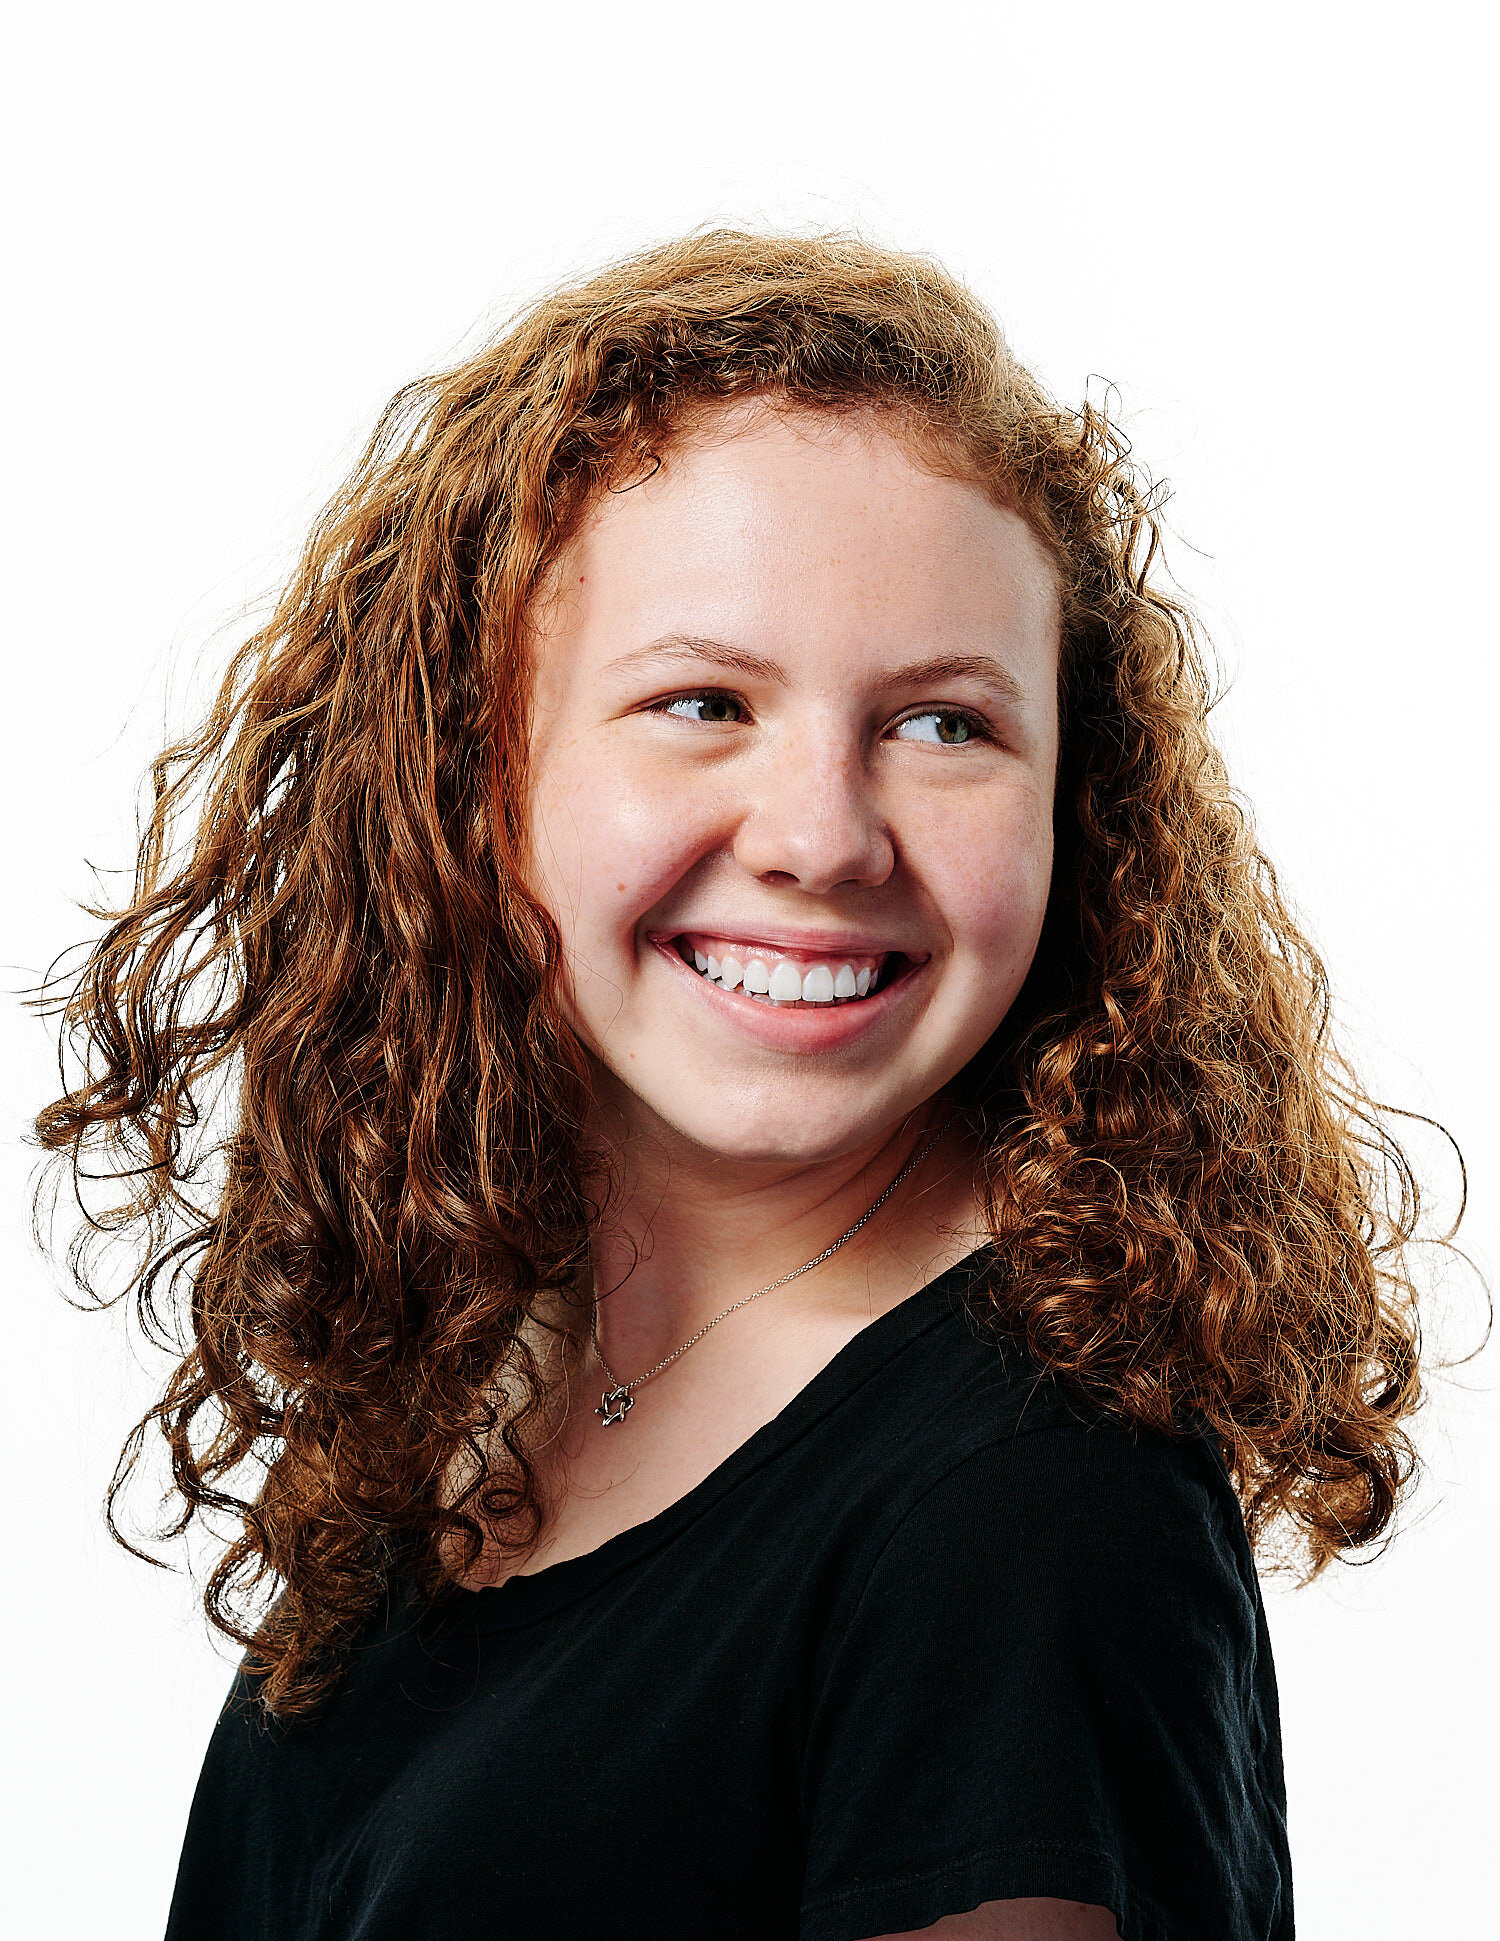  teenage actor posing for a headshot picture in a professional photo studio with white background. She is caucasian, has curly red hair, a round freckled face with full lips. She wears black t-shirt. 